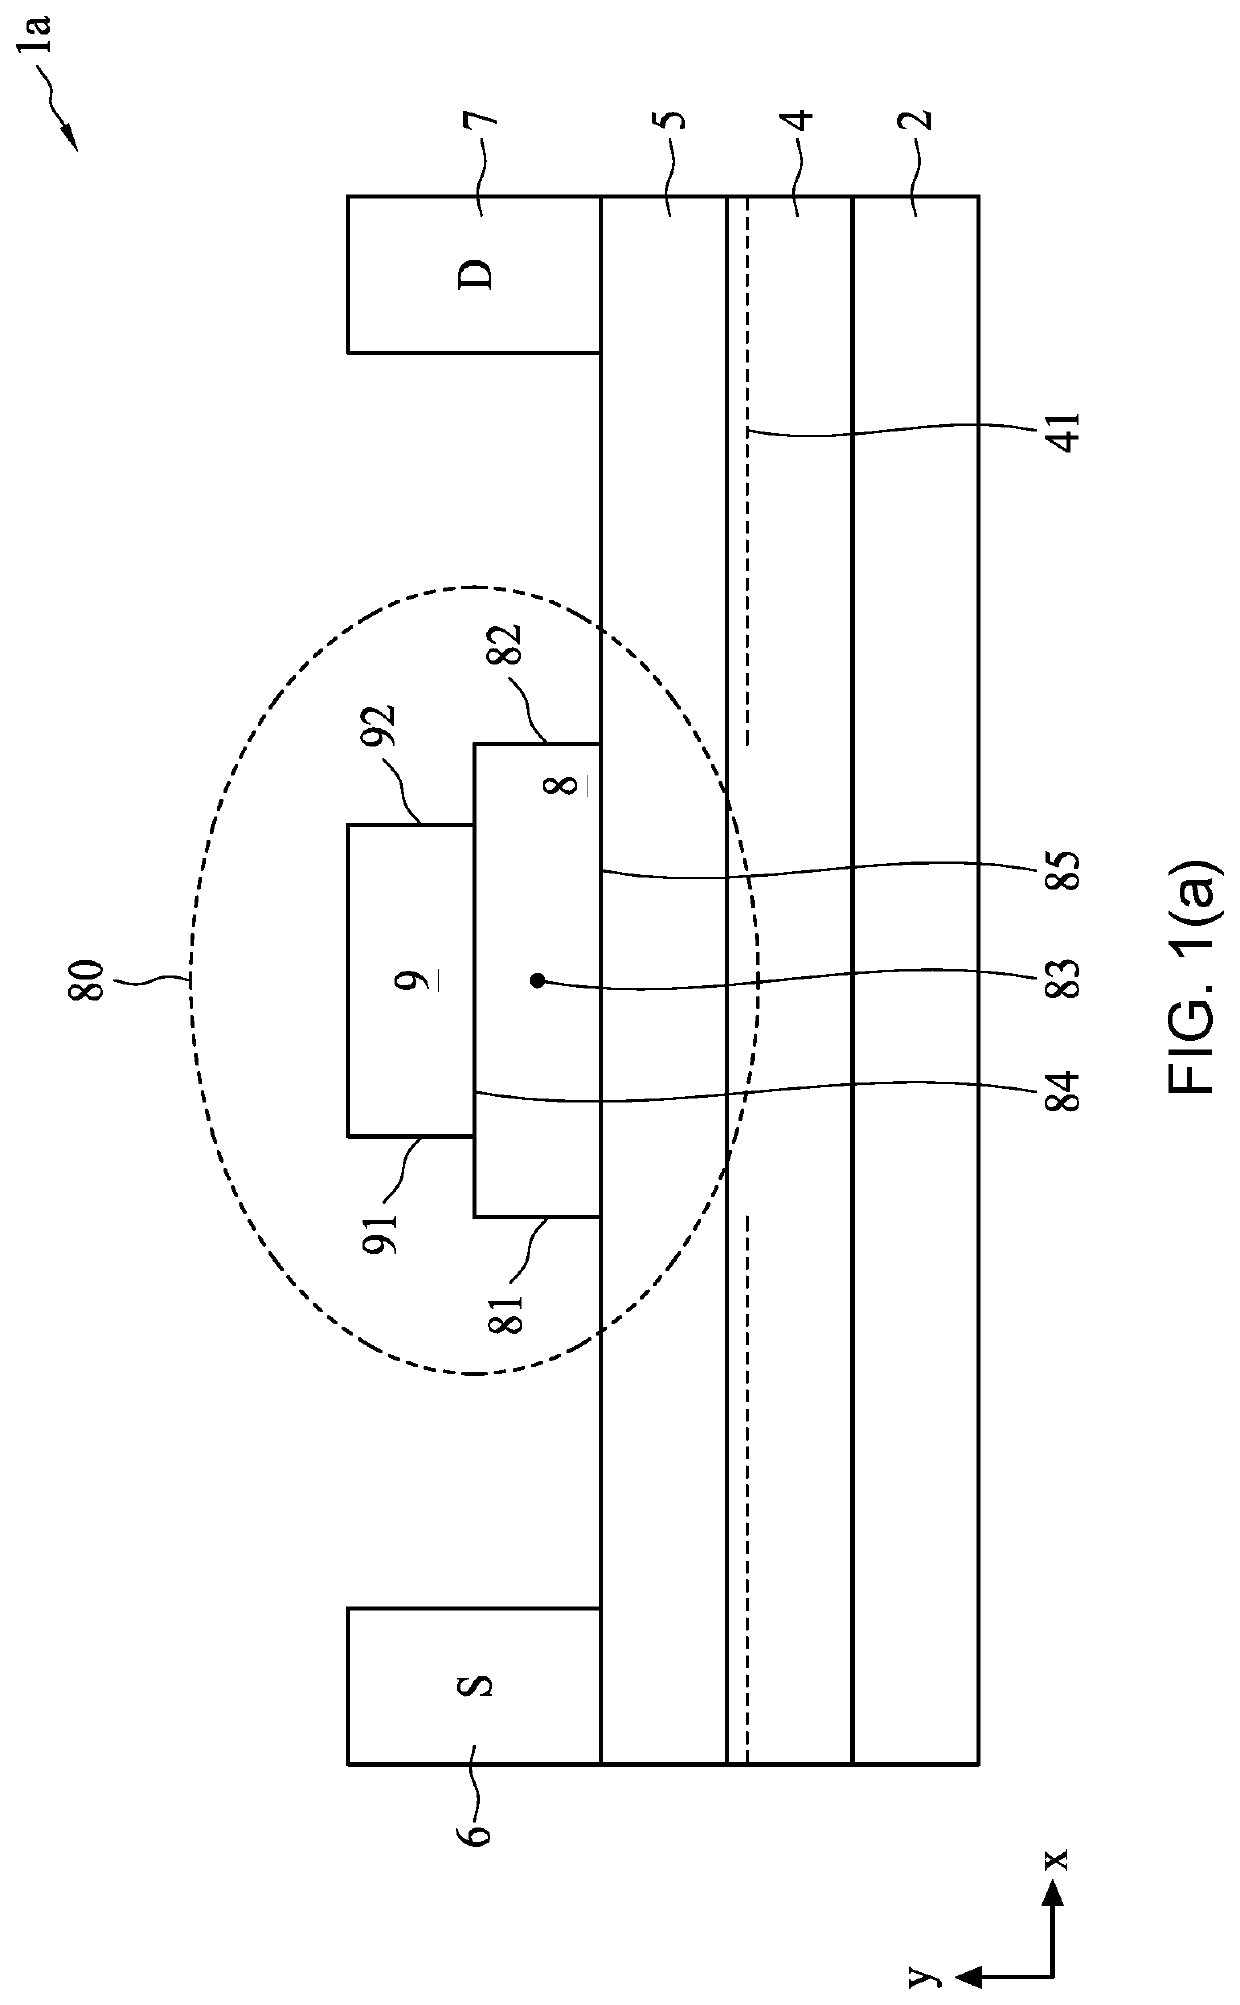 Semiconductor device having improved gate leakage current